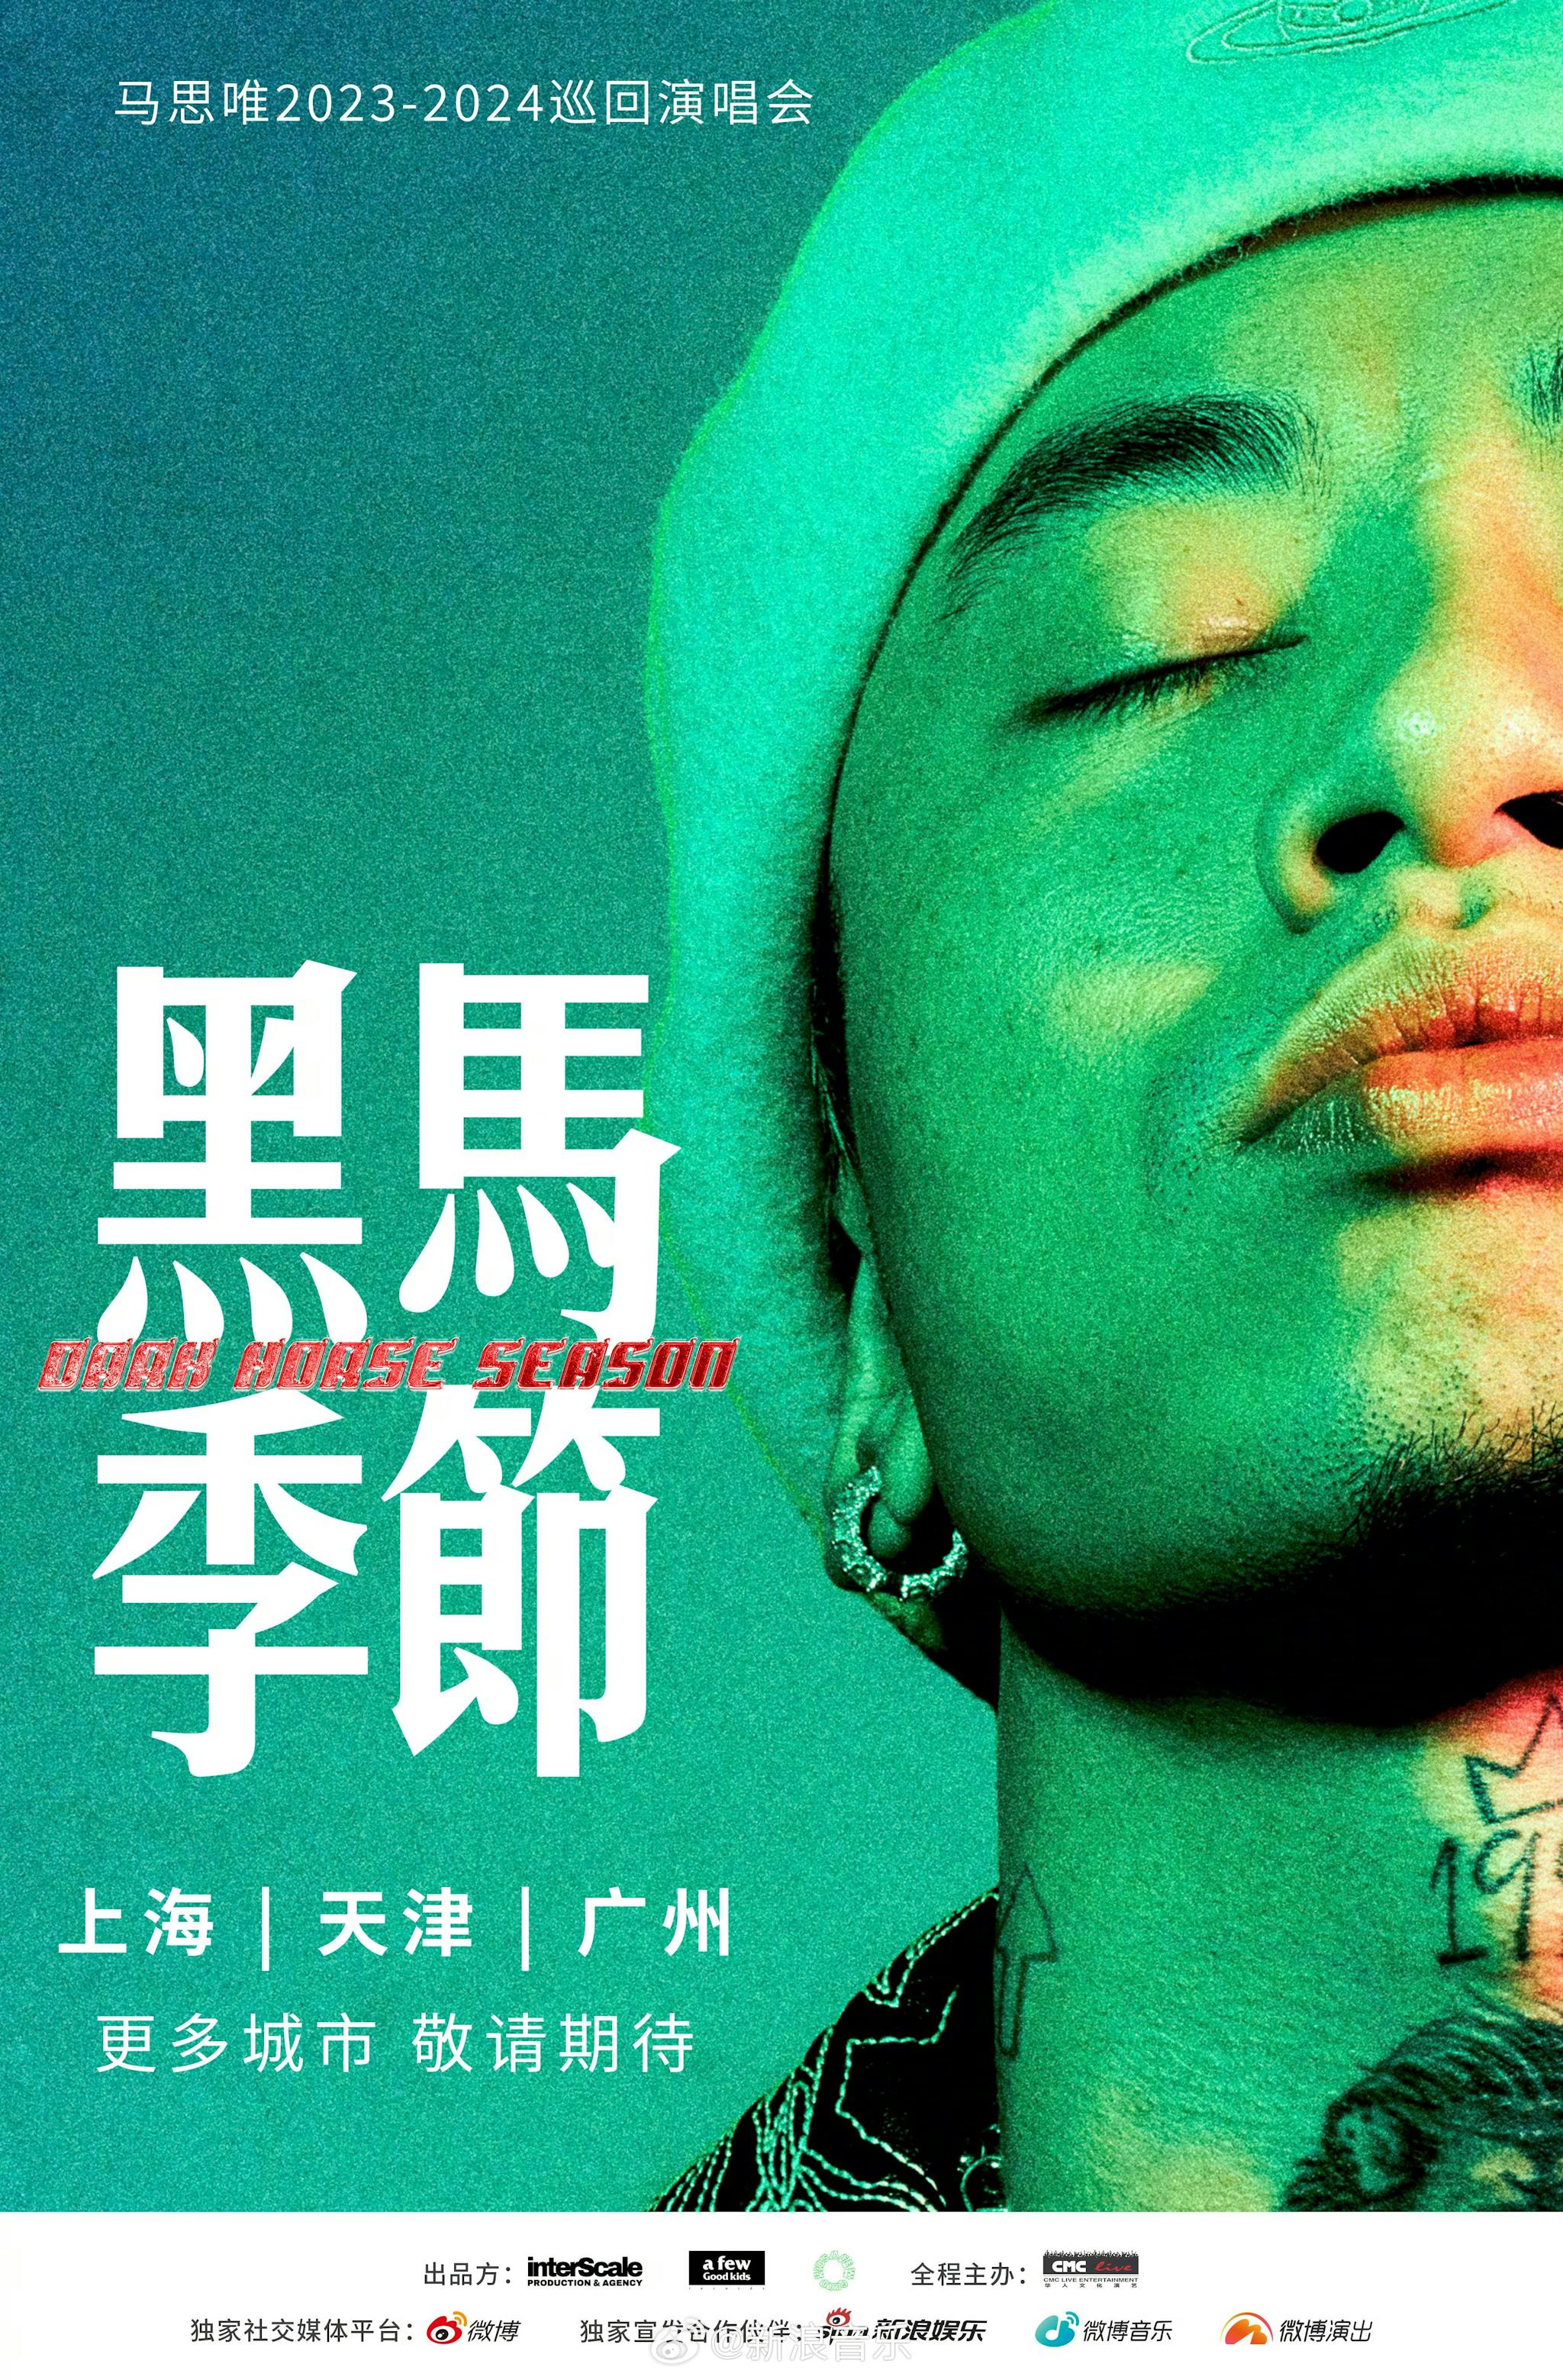 Chinese Rapper Masiwei Announces 20232024 Tour Dates Trending on Weibo